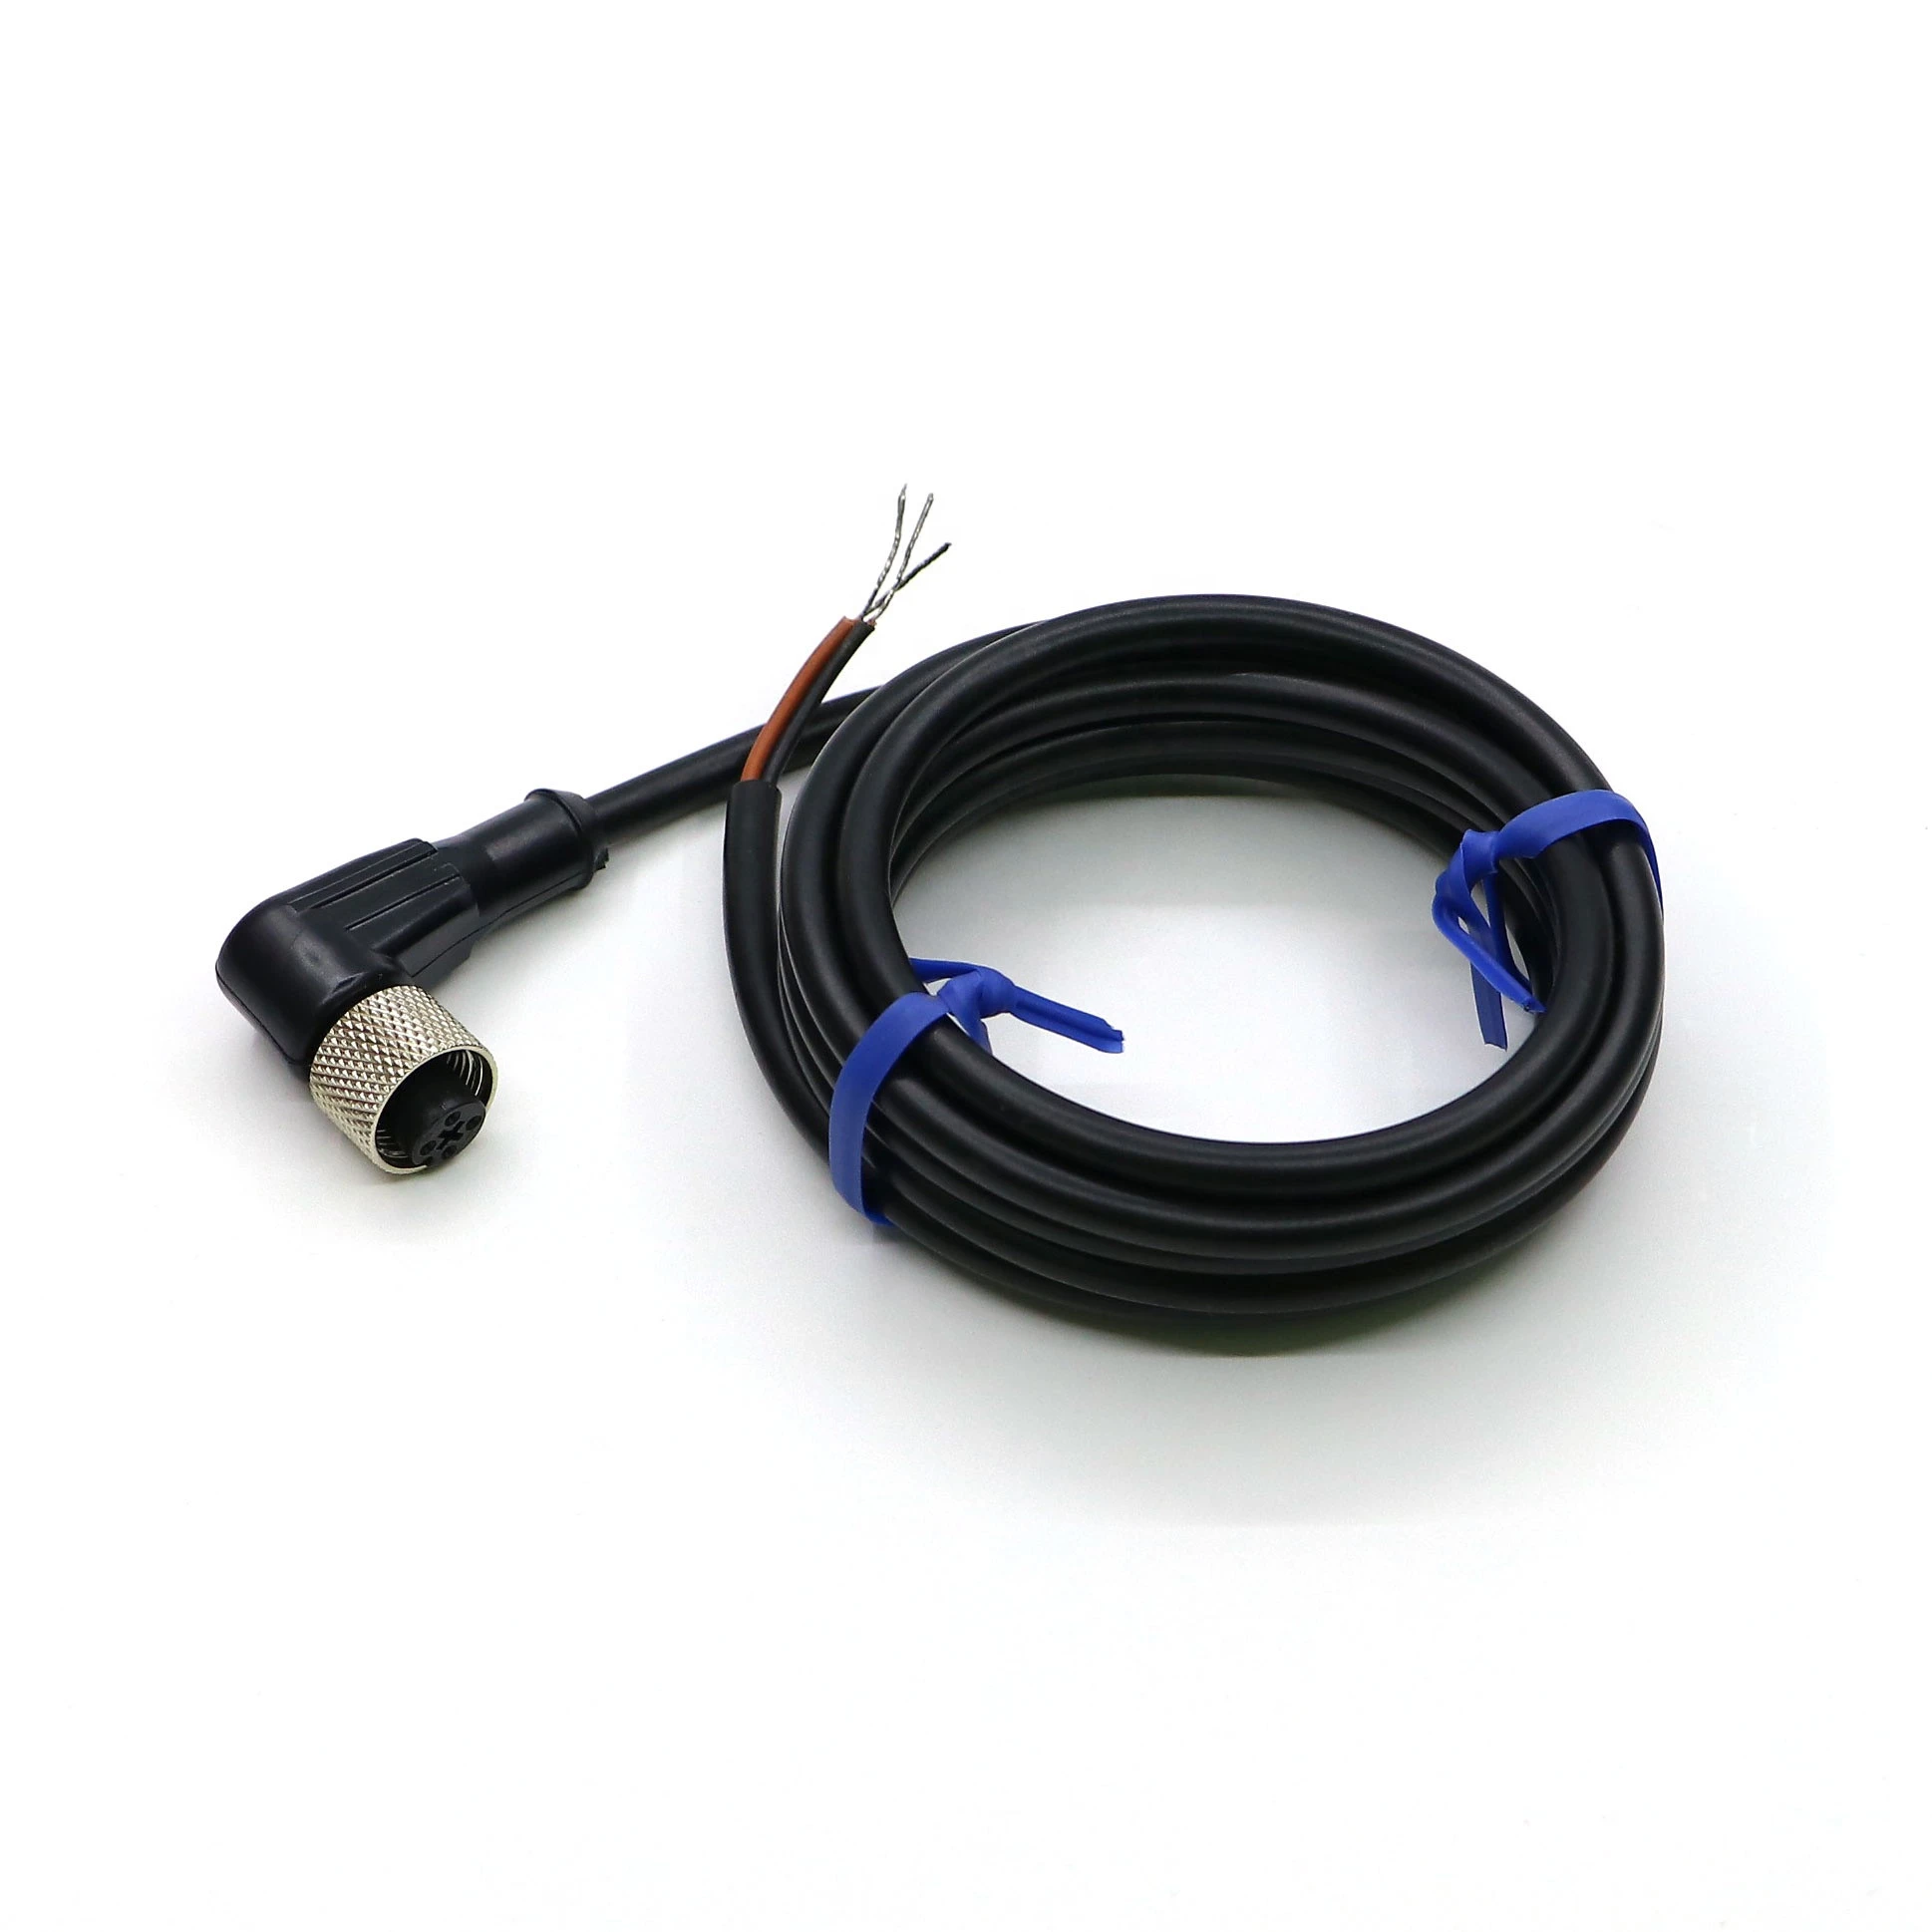 plug wires 3PIN CL3-12 with LED NPN light proximity sensor accessory